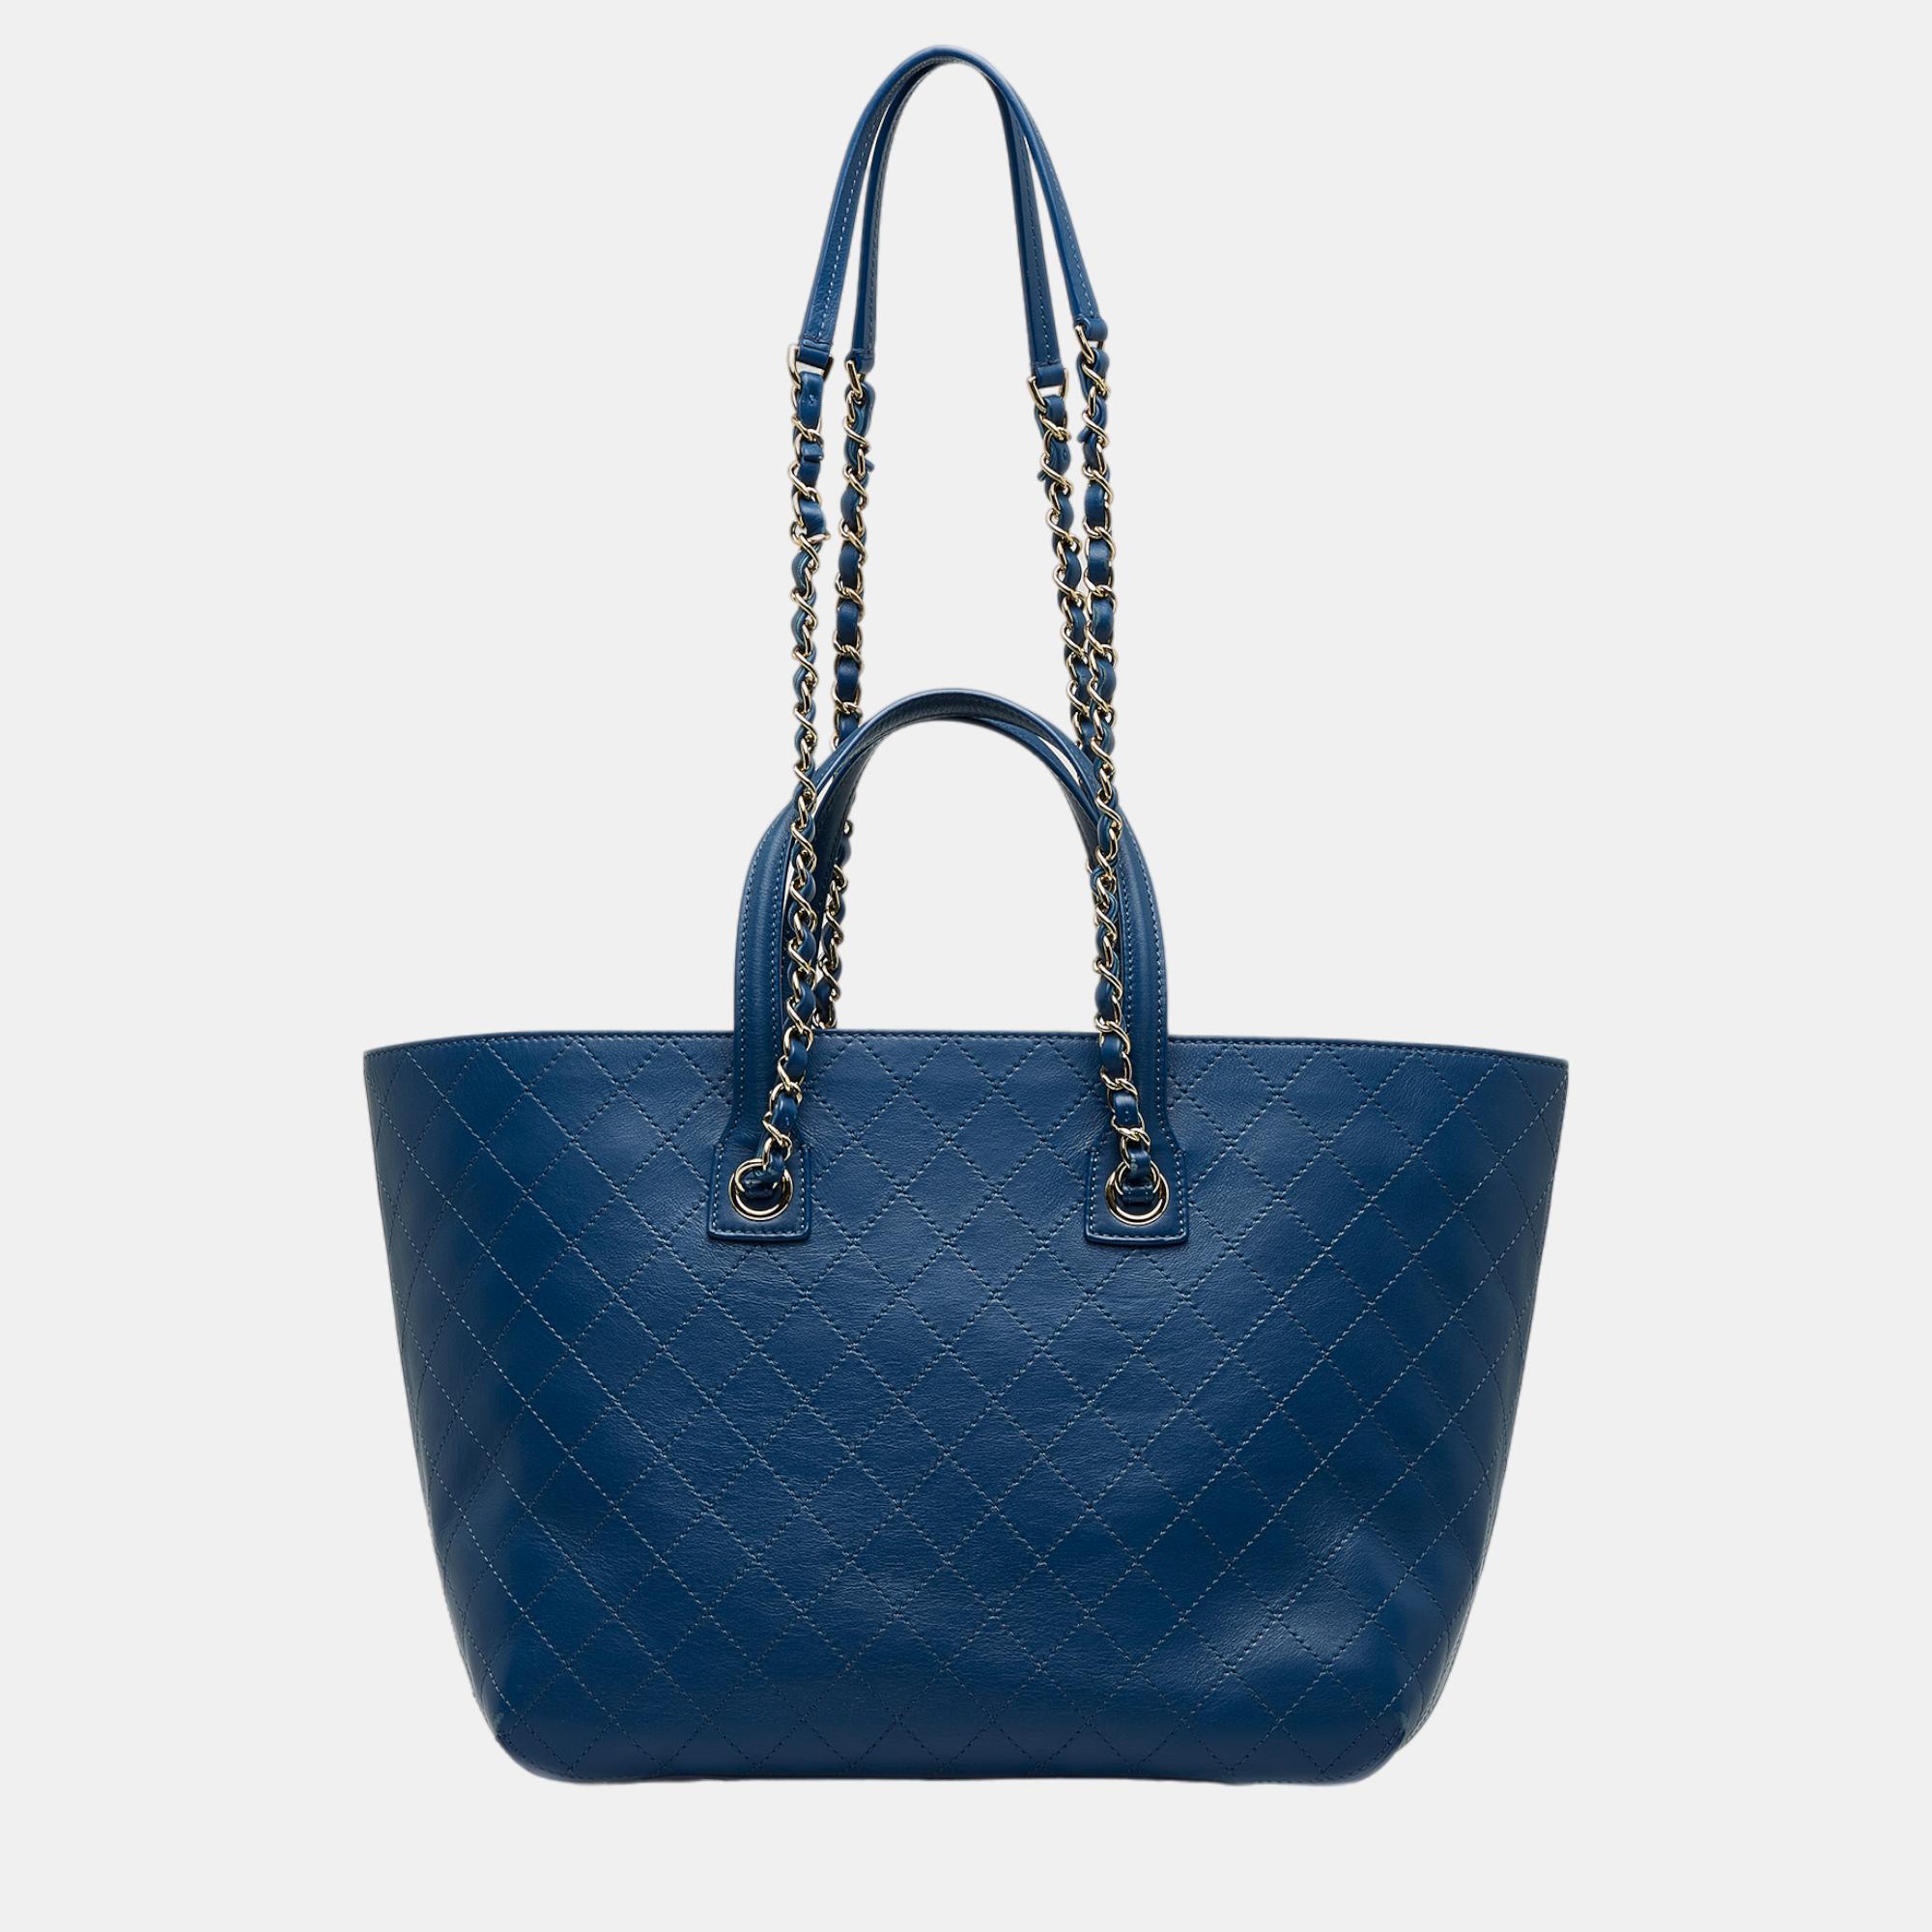 Chanel Blue Covered CC Shopping Tote